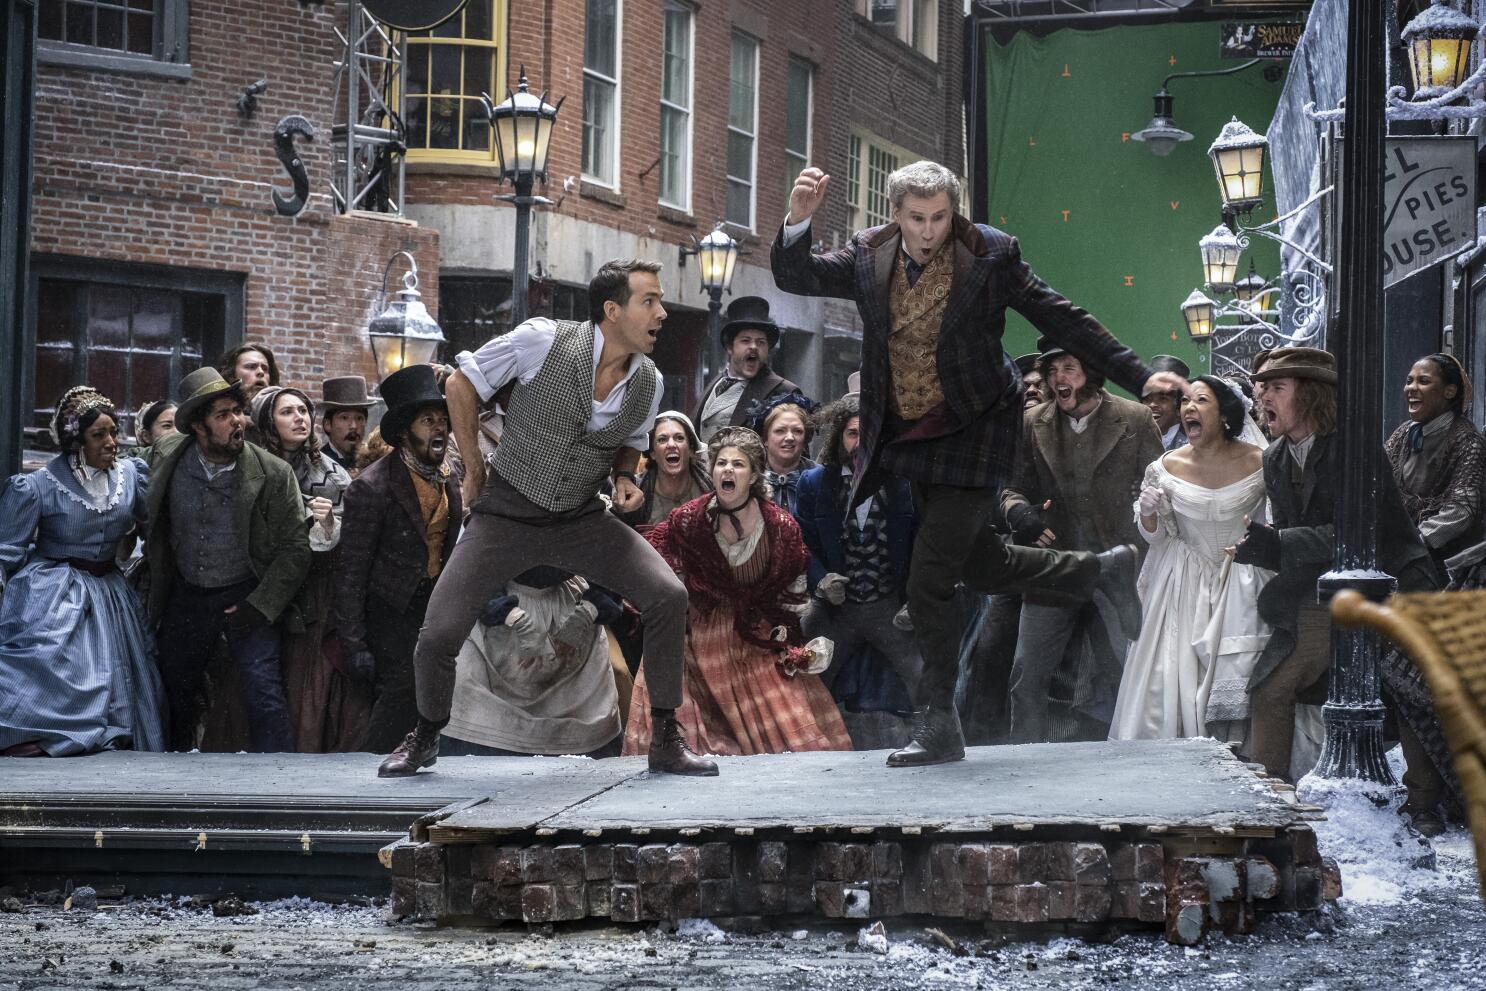 Review: 'Spirited' a clever musical spin on 'A Christmas Carol